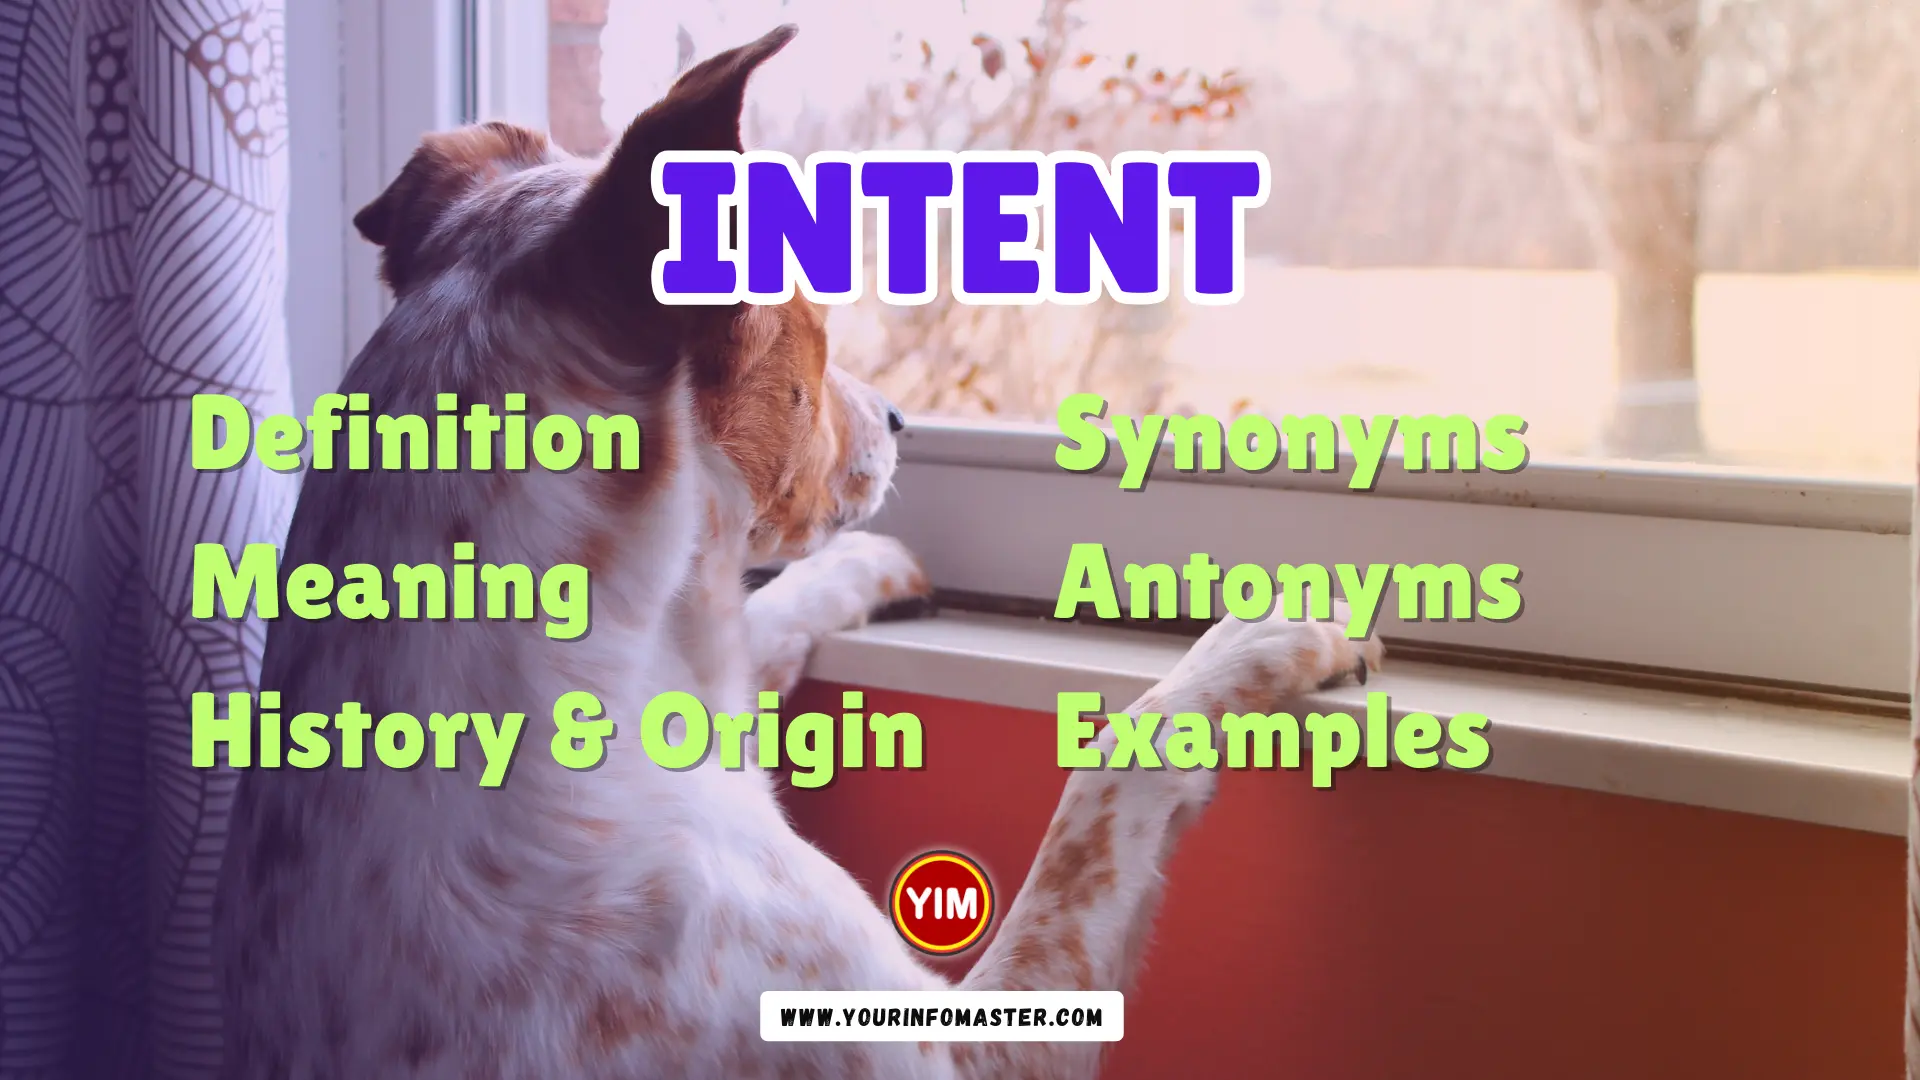 Intent Synonyms, Antonyms, Example Sentences